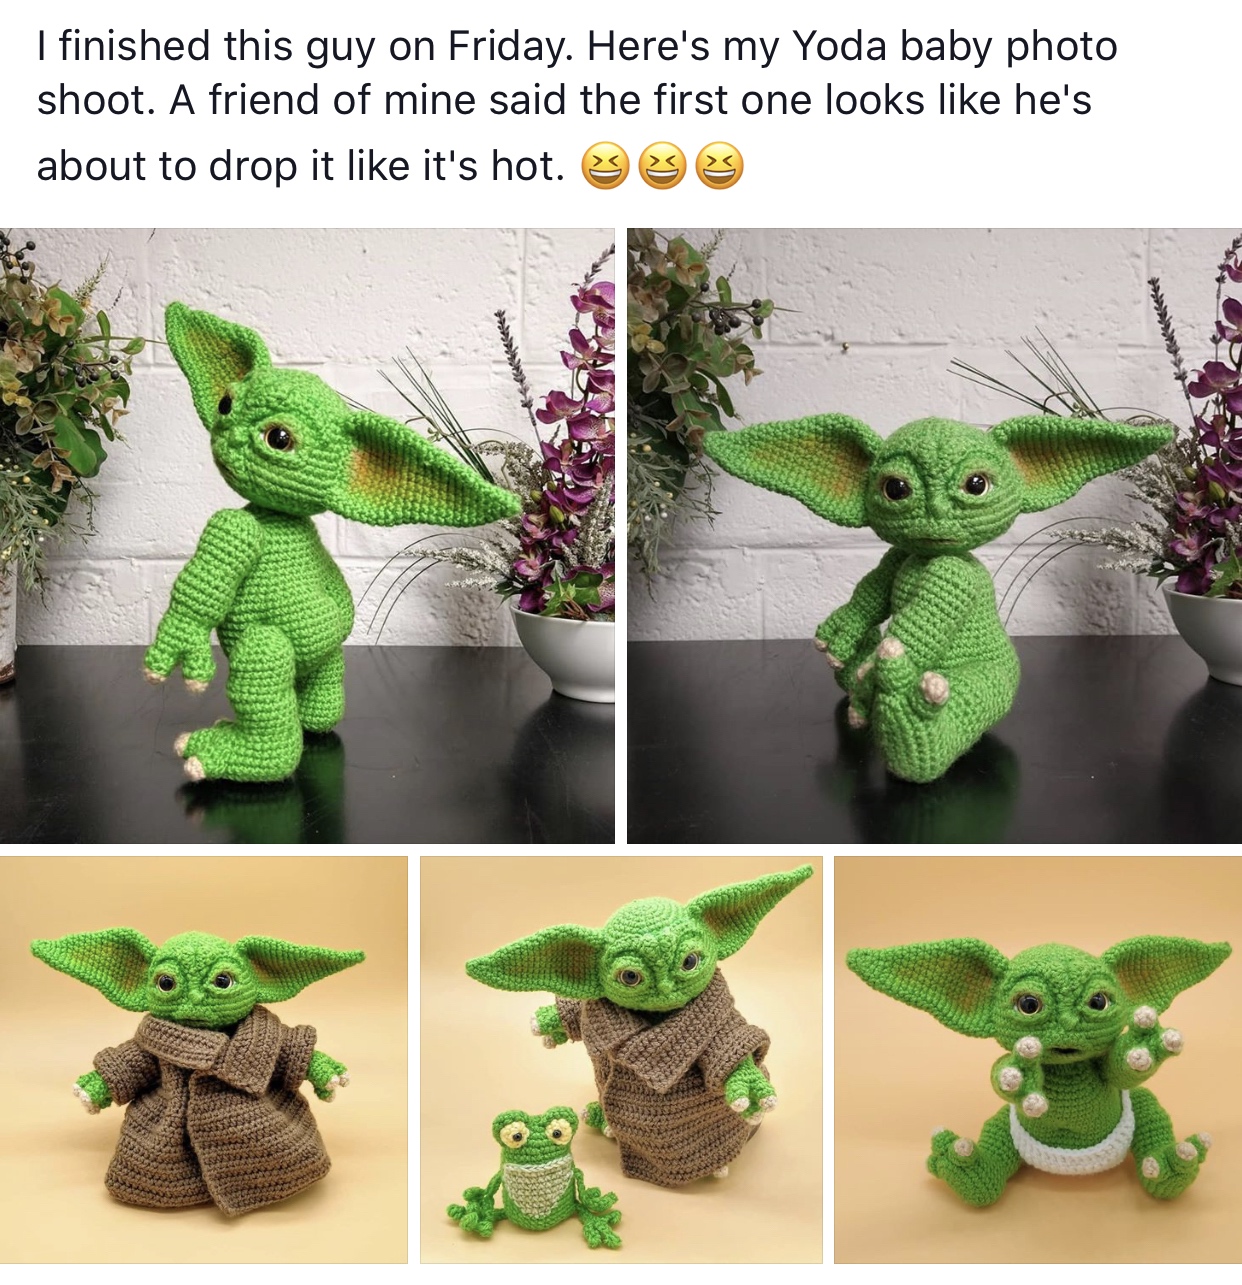 meme - creative arts - I finished this guy on Friday. Here's my Yoda baby photo shoot. A friend of mine said the first one looks he's about to drop it it's hot.